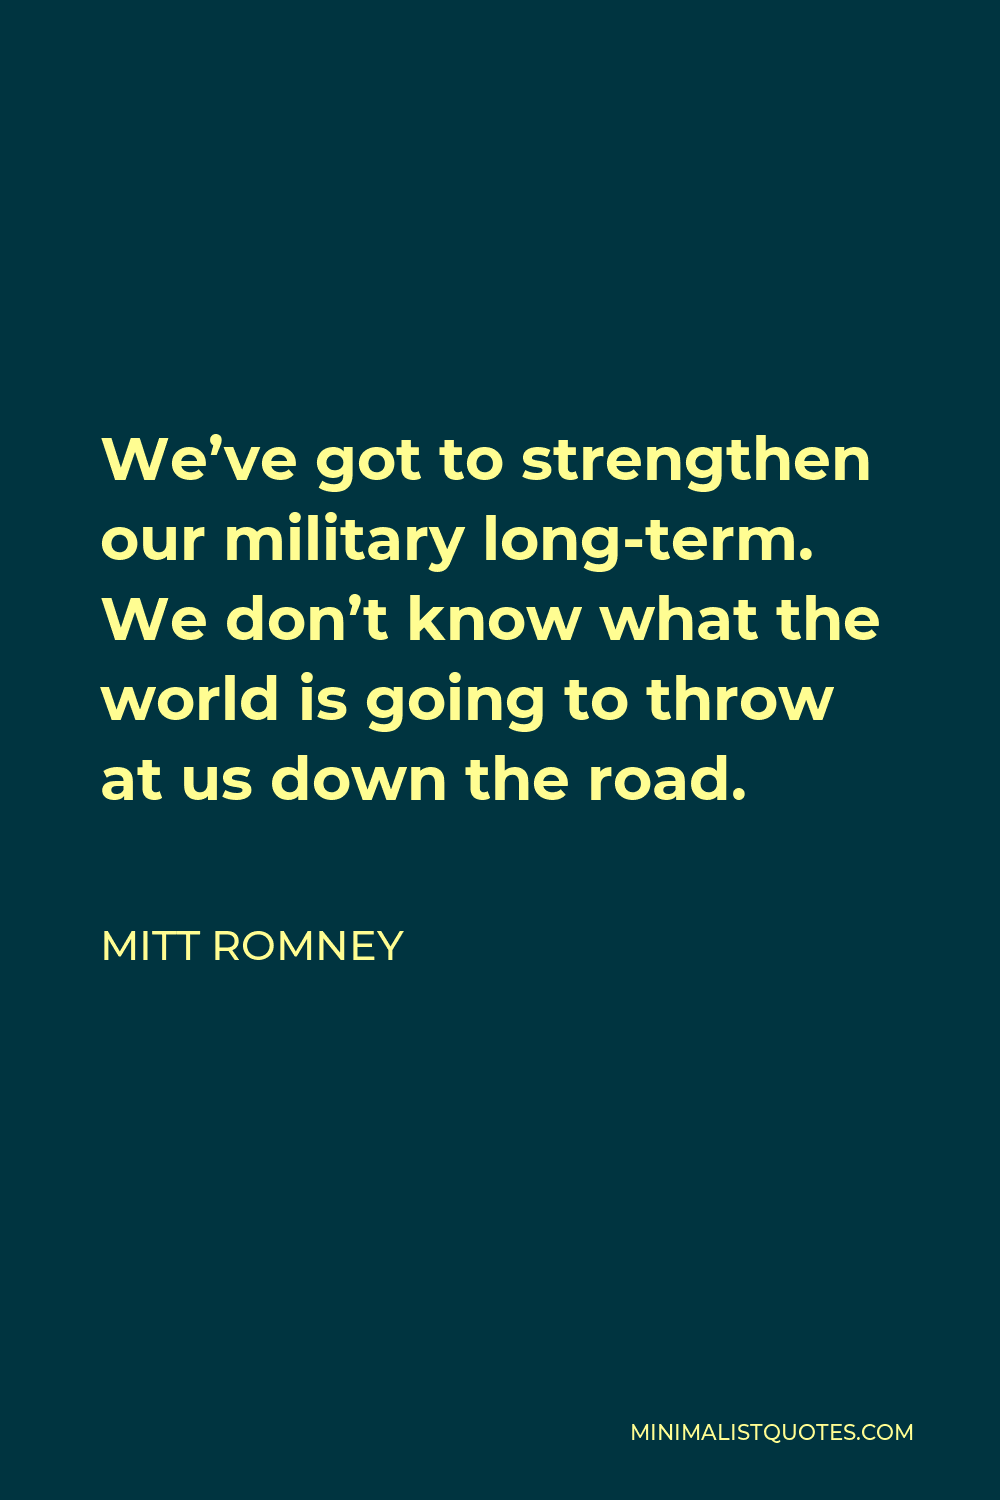 Mitt Romney Quote - We’ve got to strengthen our military long-term. We don’t know what the world is going to throw at us down the road.